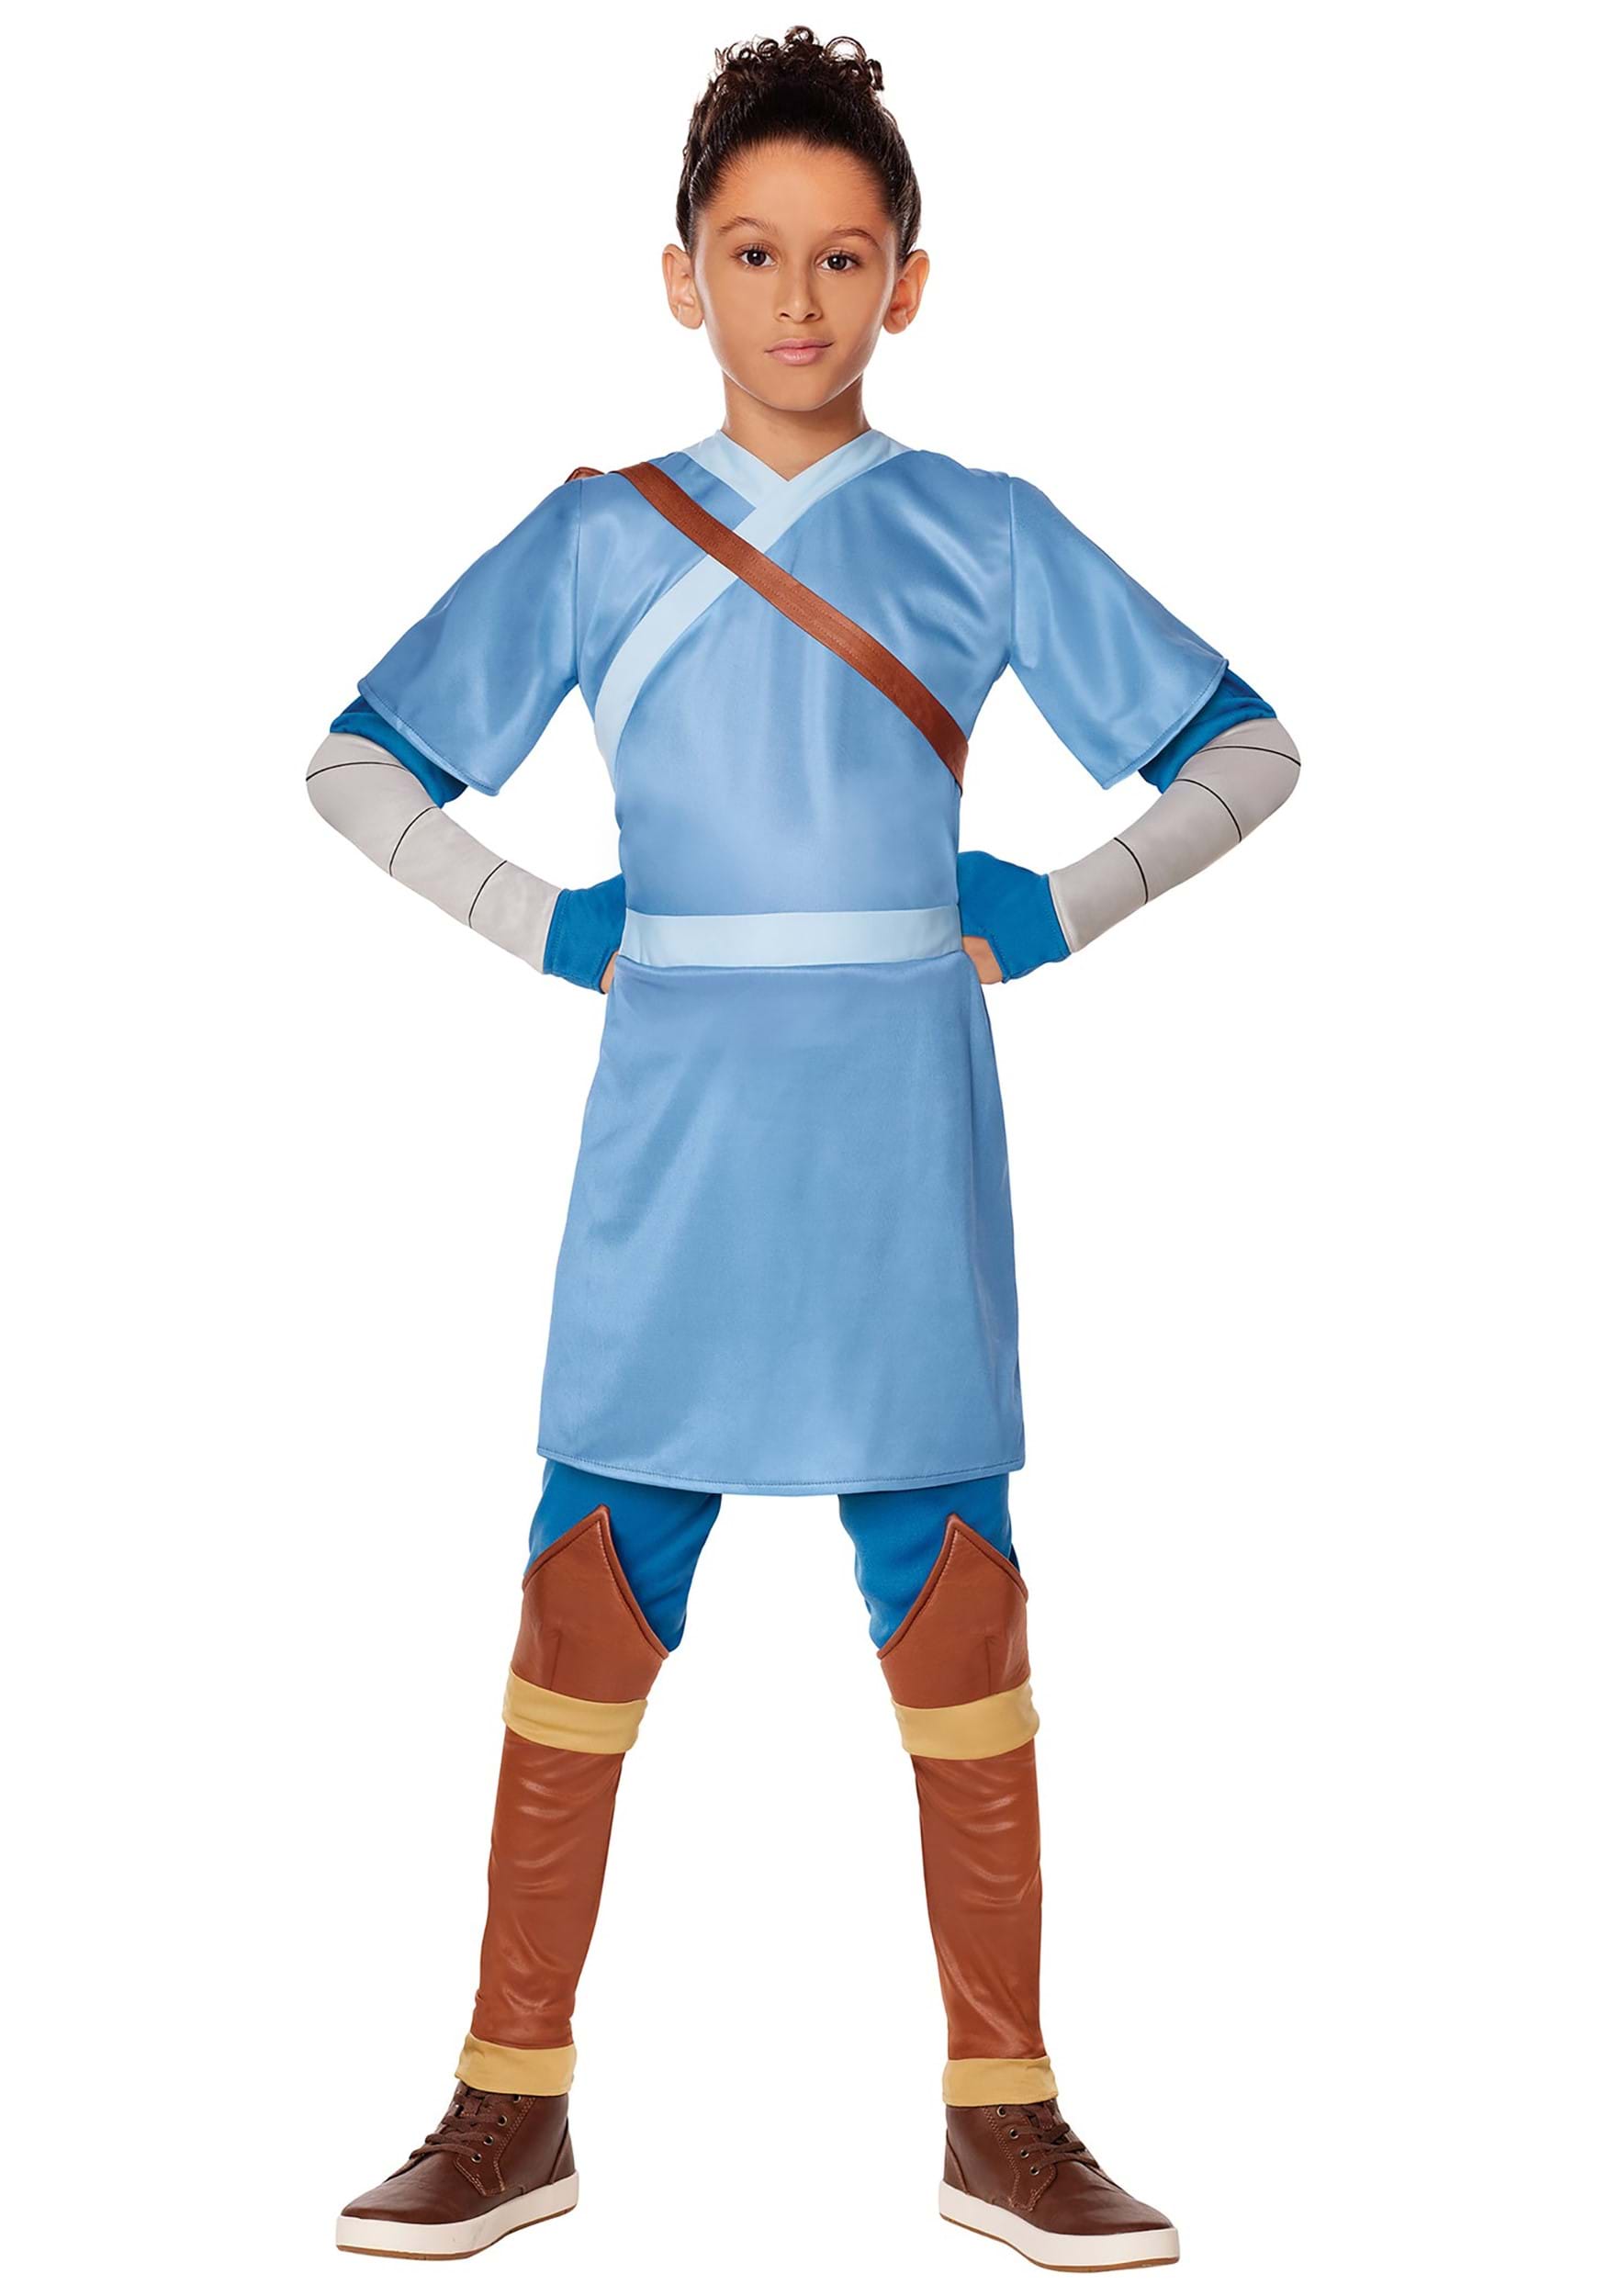 Kids Children Avatar The Way of Water Jake Sully Cosplay Costume Outf